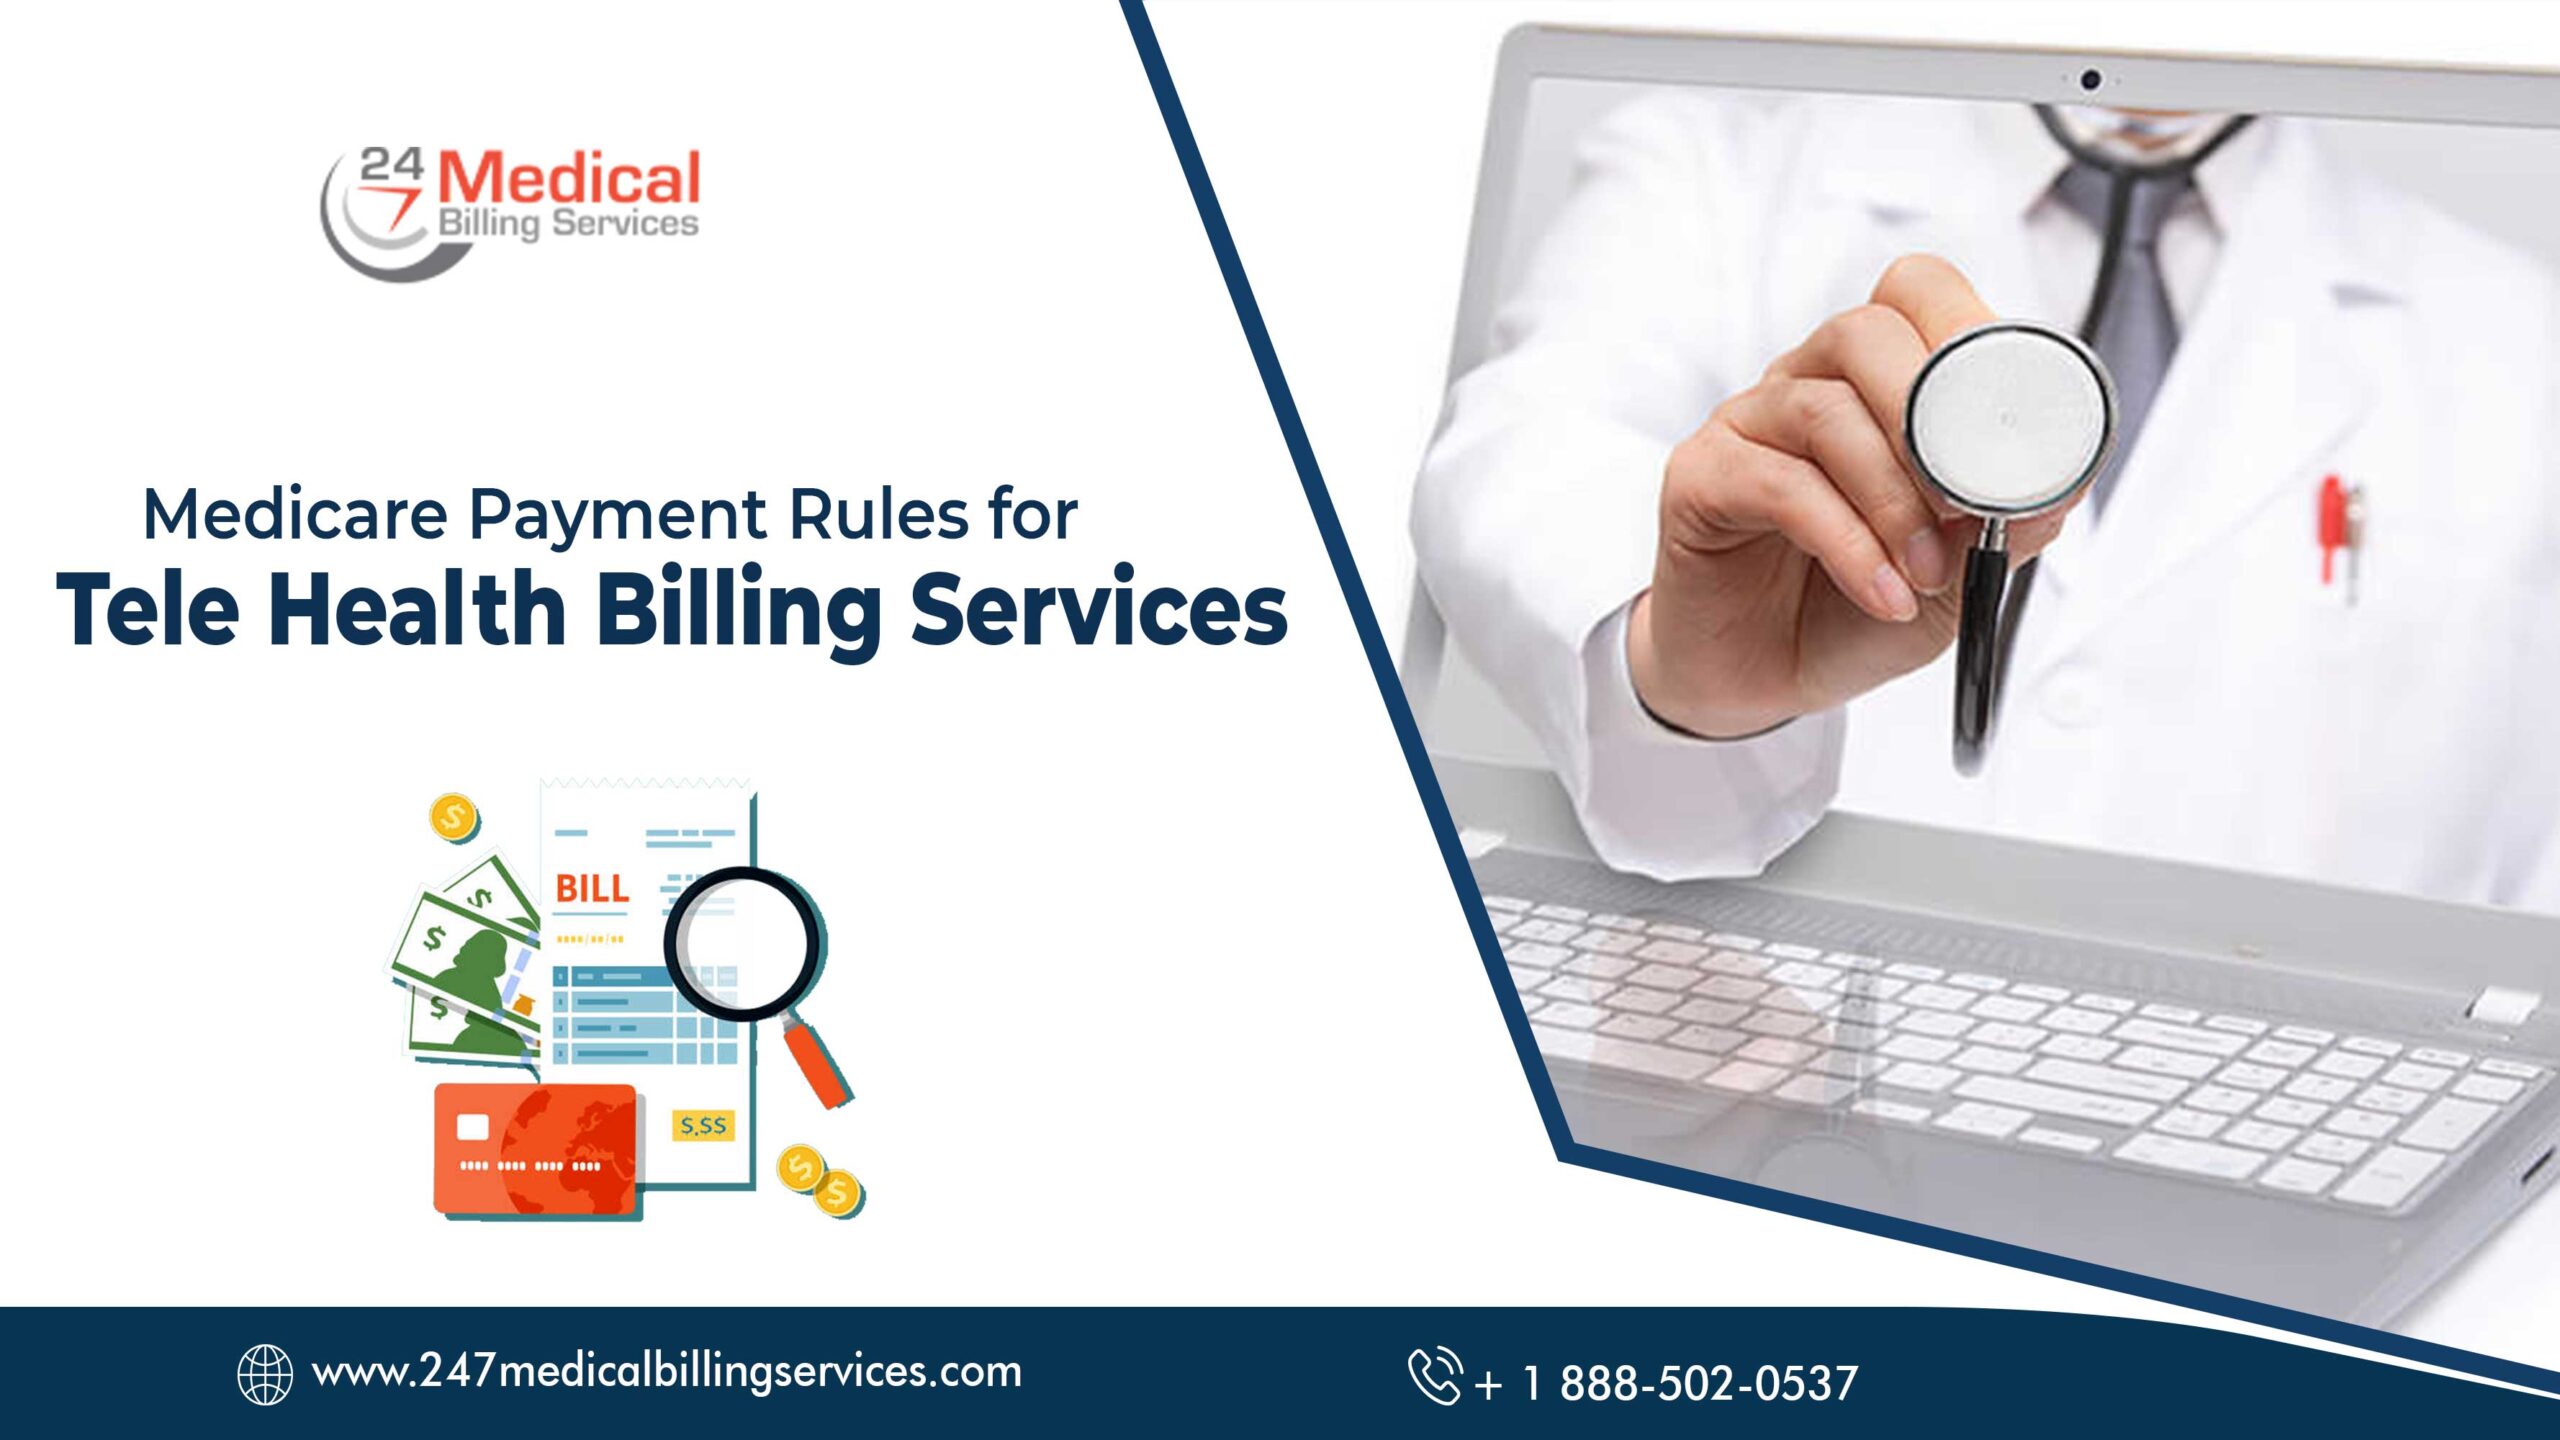 Medicare Payment Rules for Telehealth Billing Services 24/7 Medical